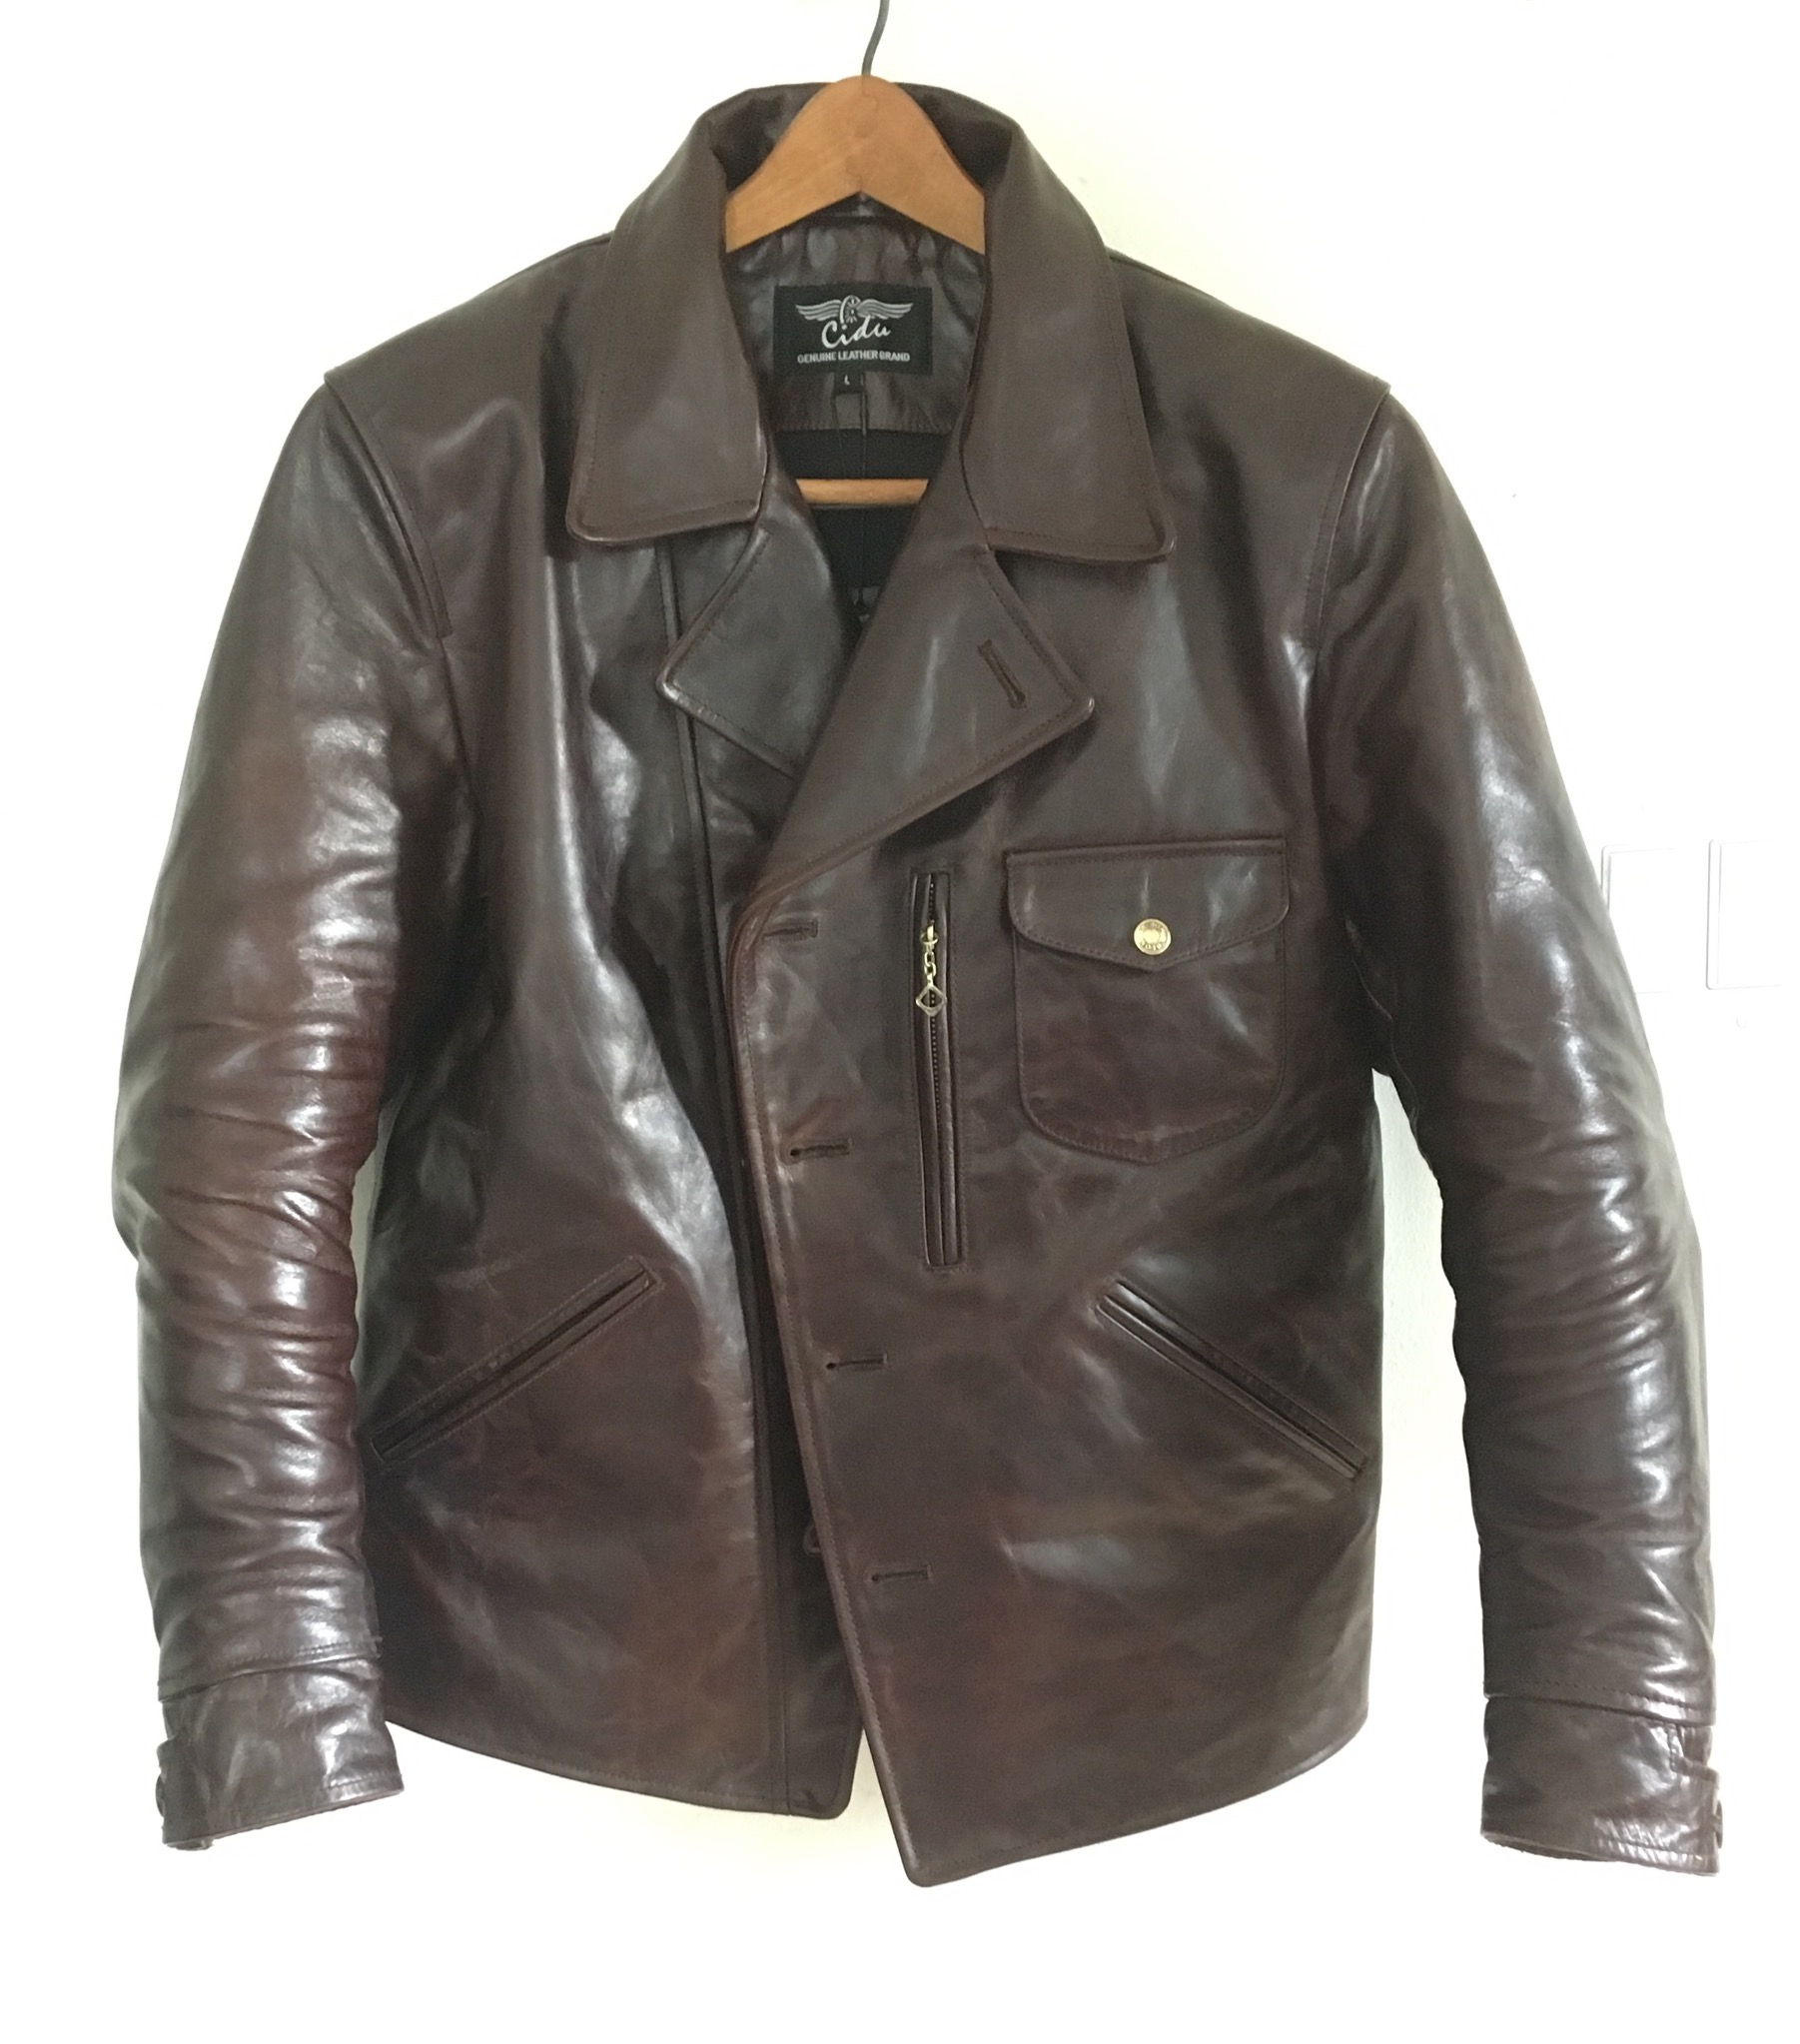 My cross-button jacket from Cidu Genuine Leather Brand (China), or 